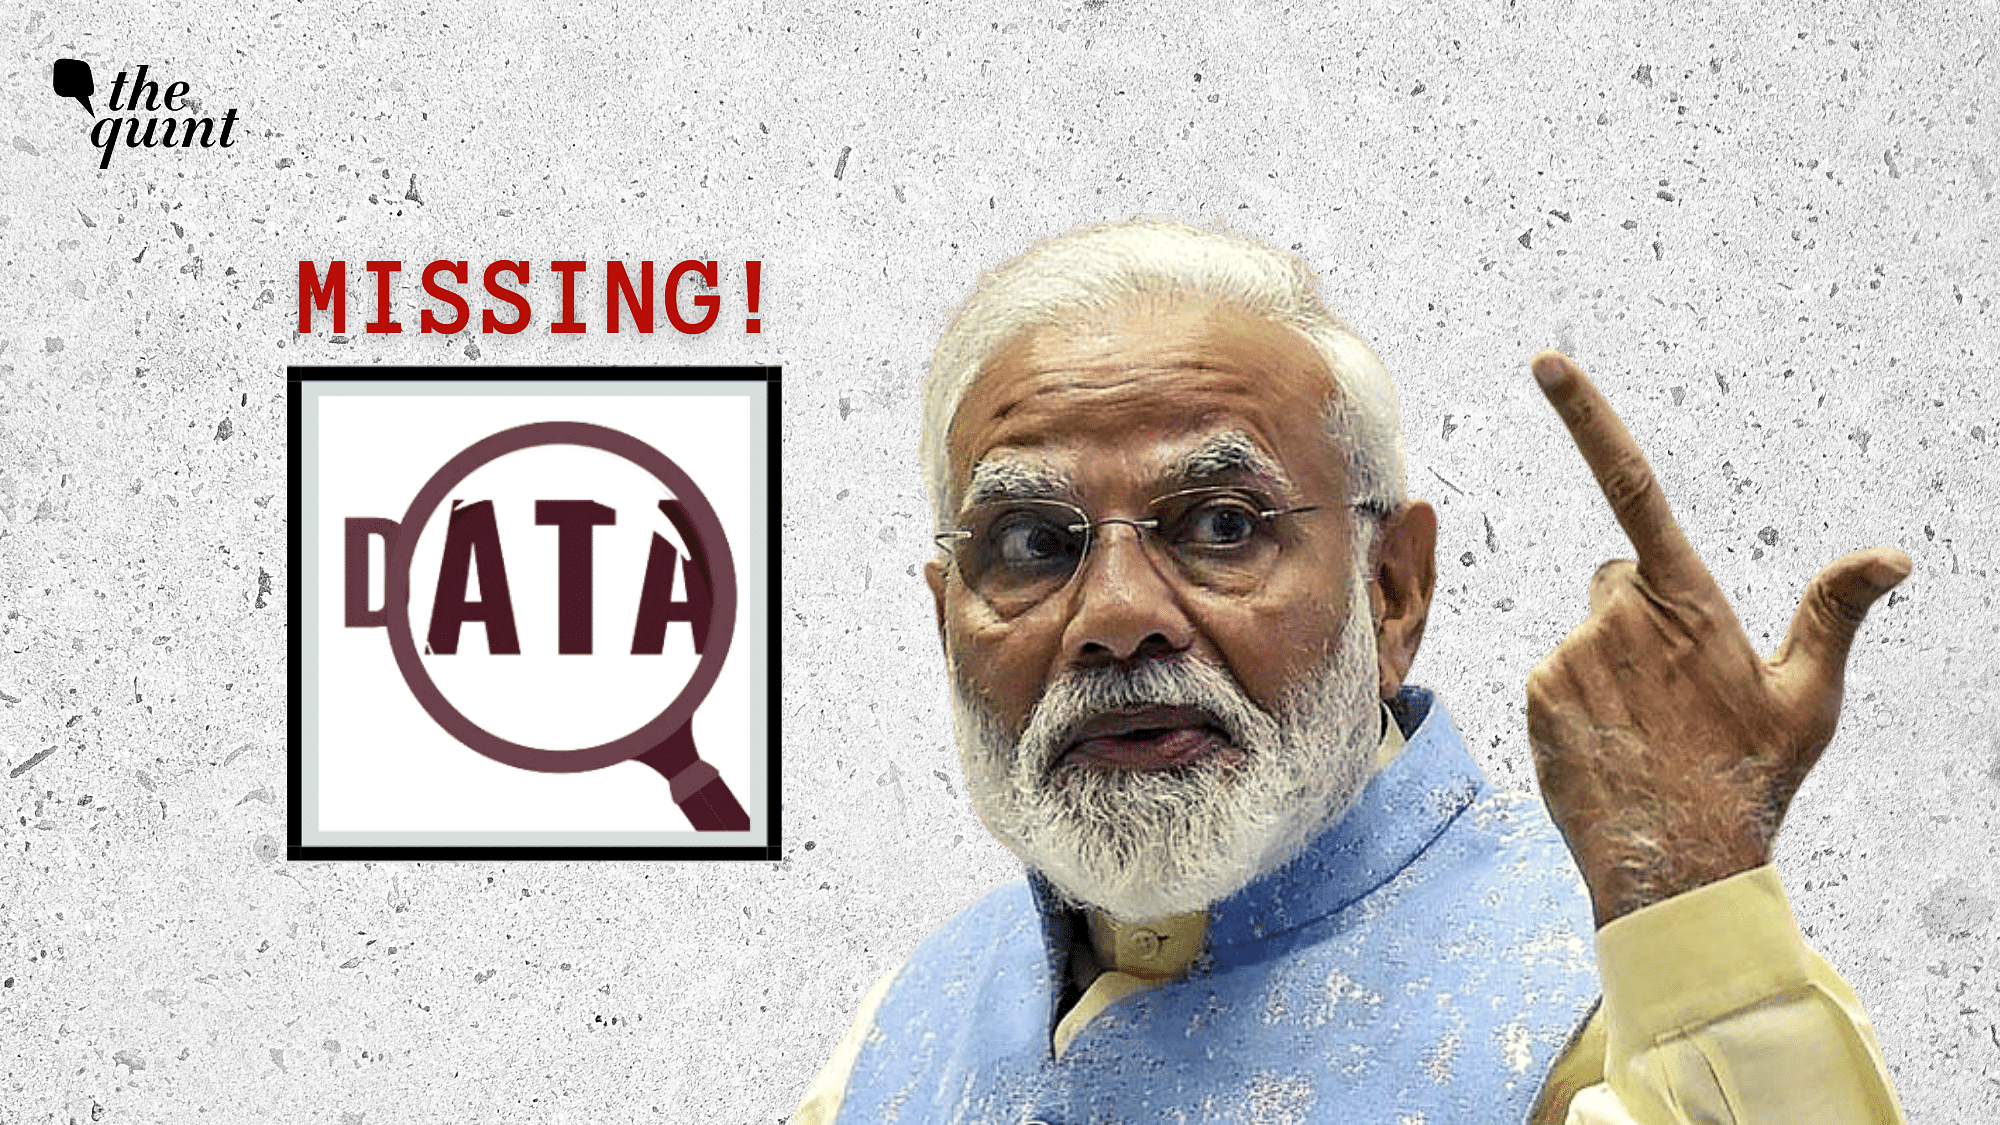 Data and Accountability have gone missing in New India. 